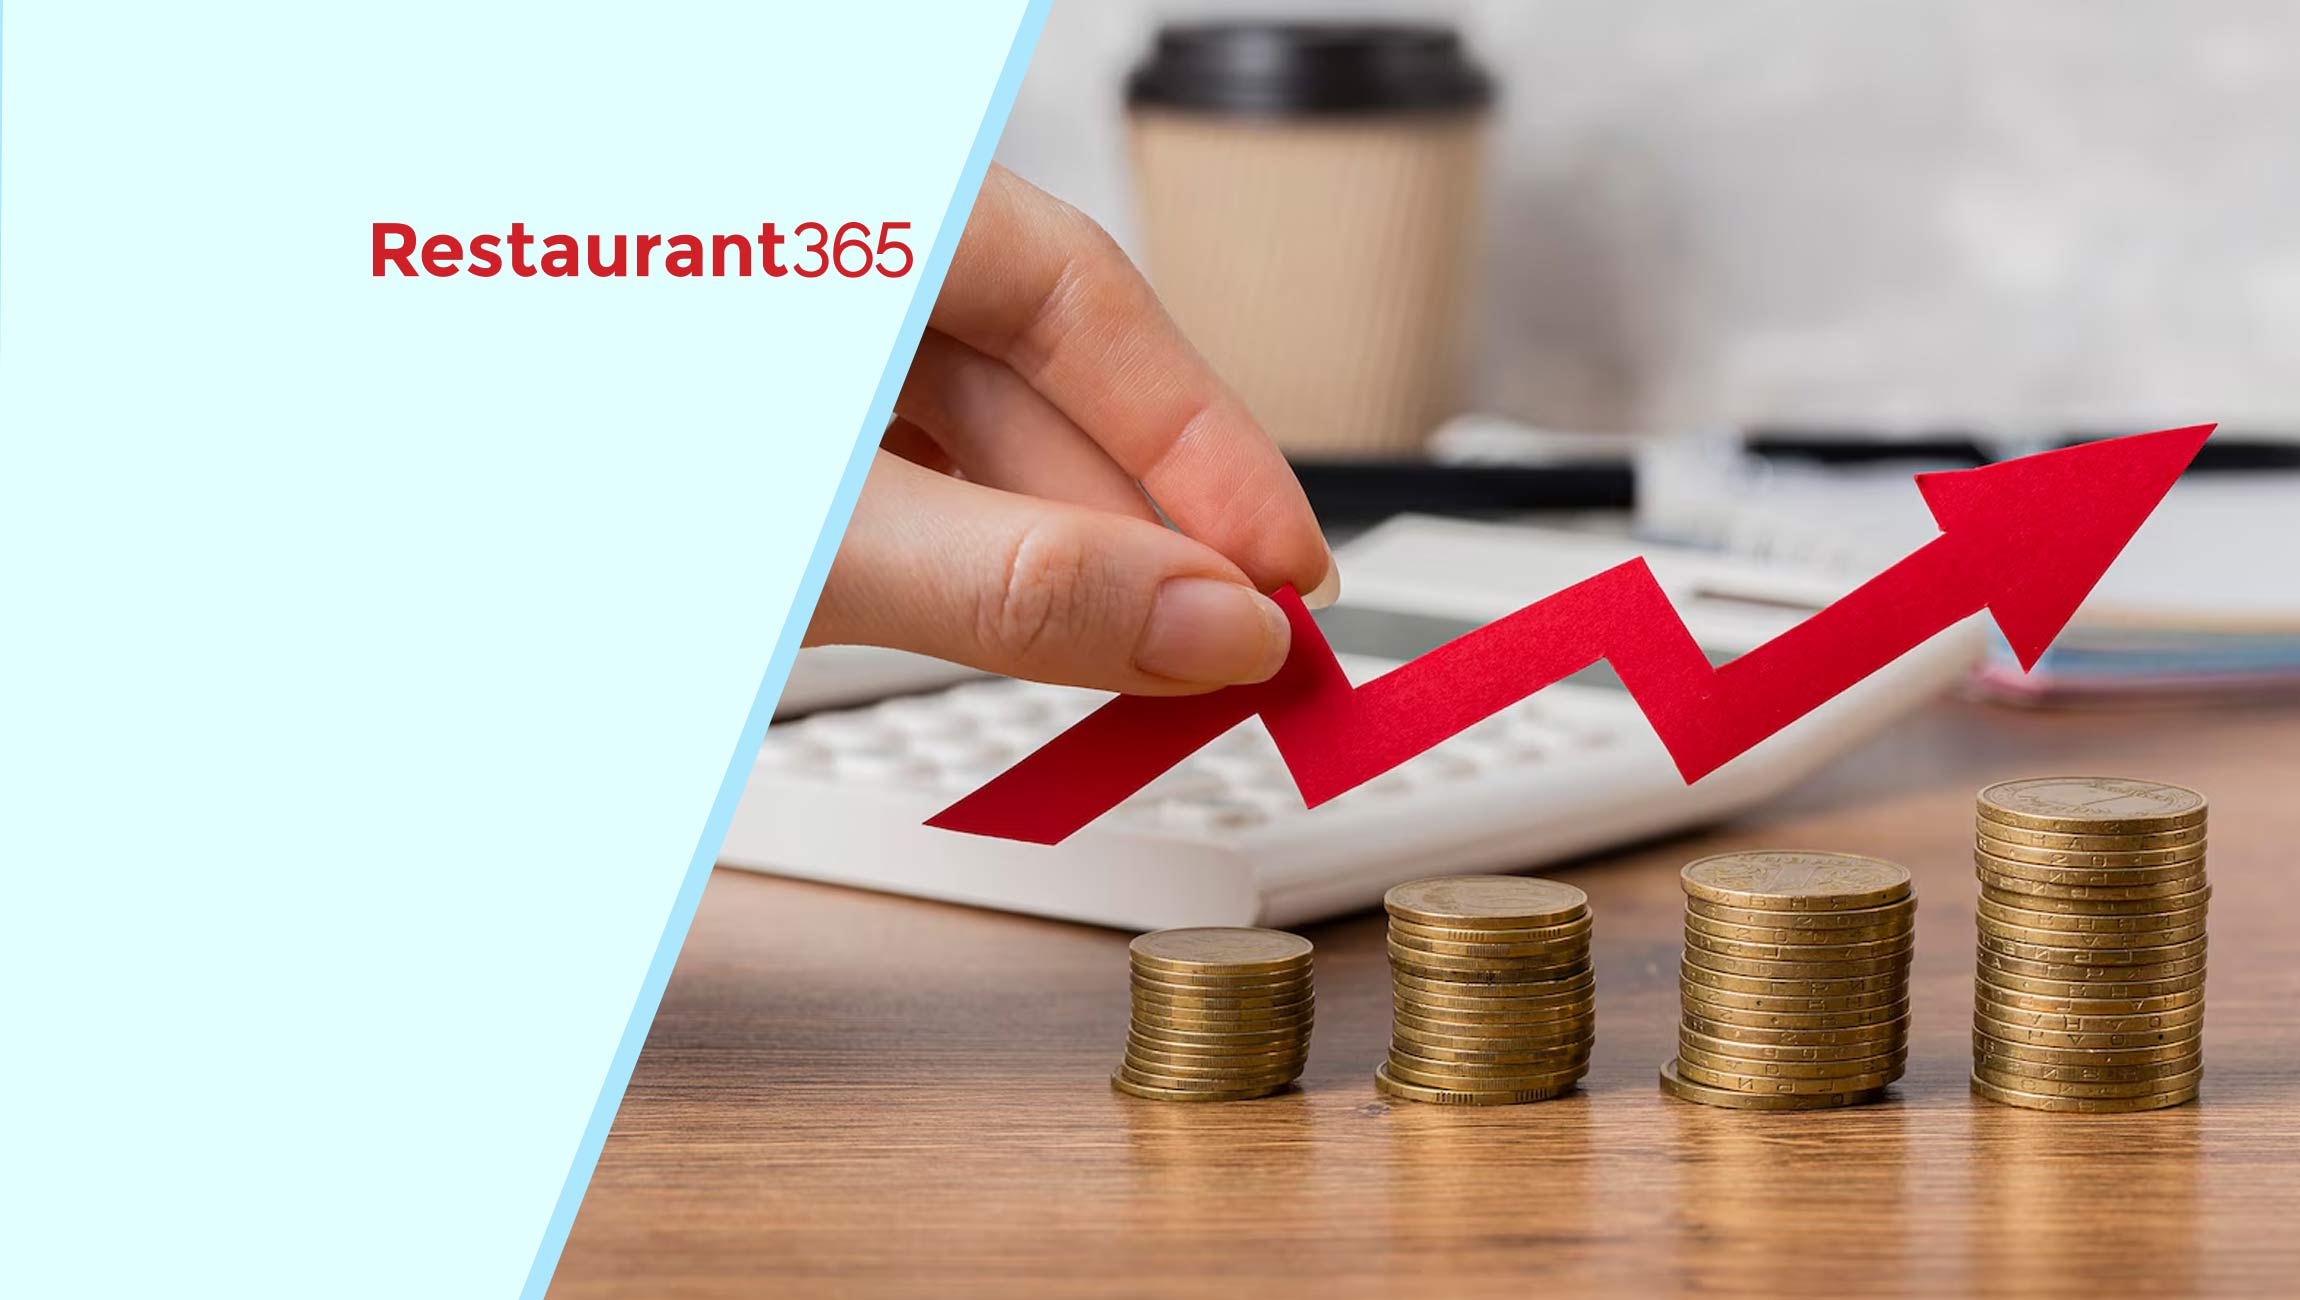 Restaurant365 Announces $175M Funding Round Led by ICONIQ Growth